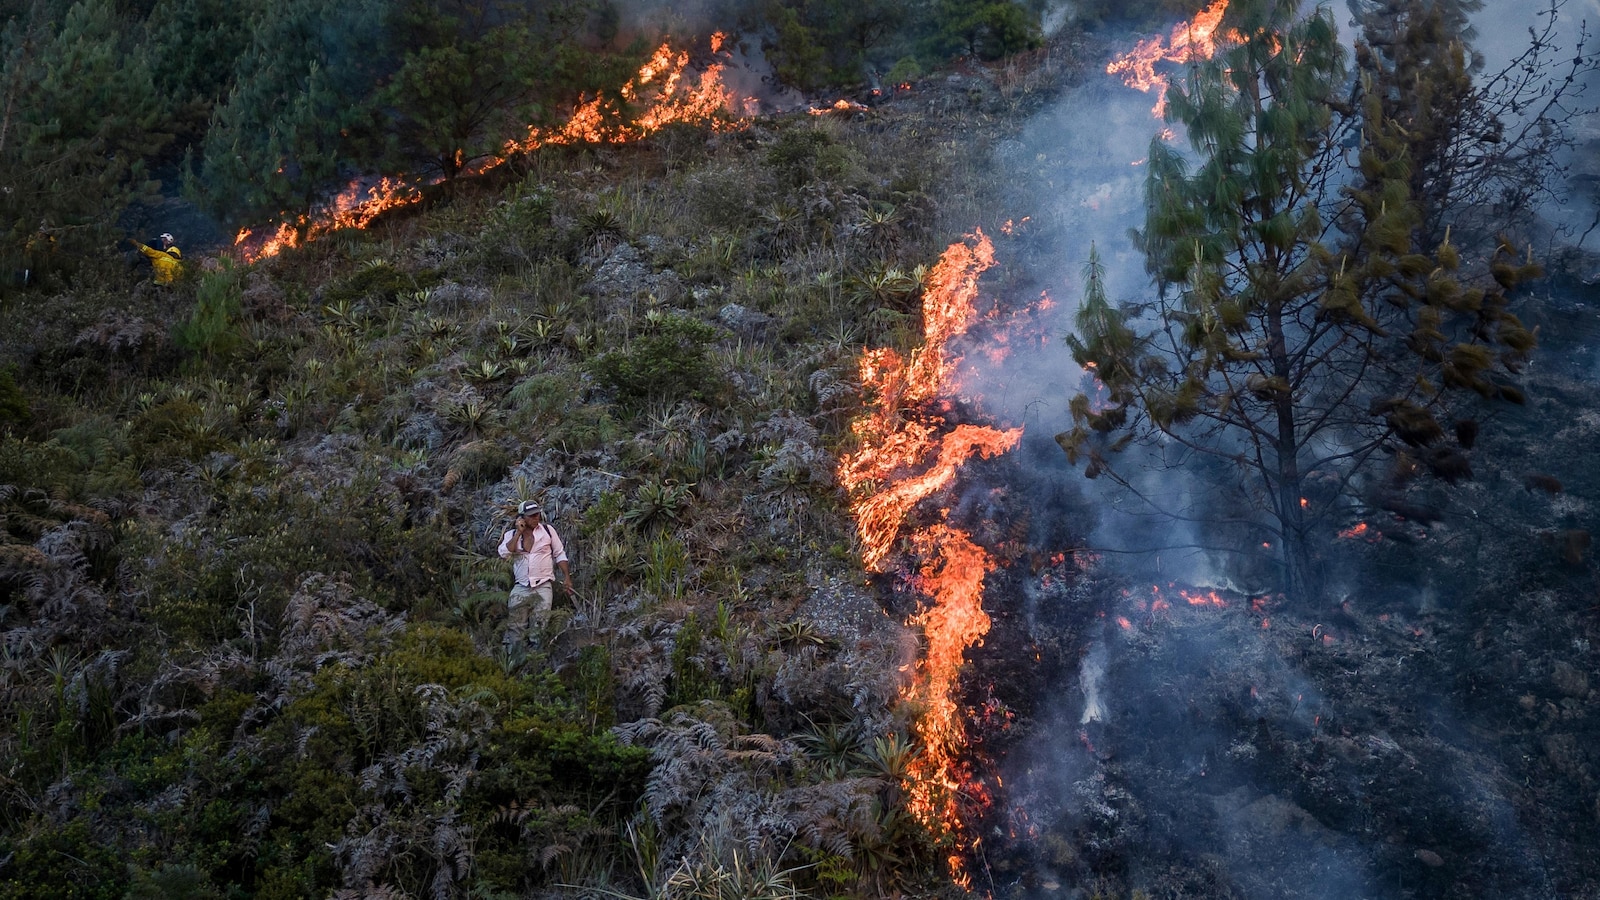 How climate change contributes to wildfires like Chile's